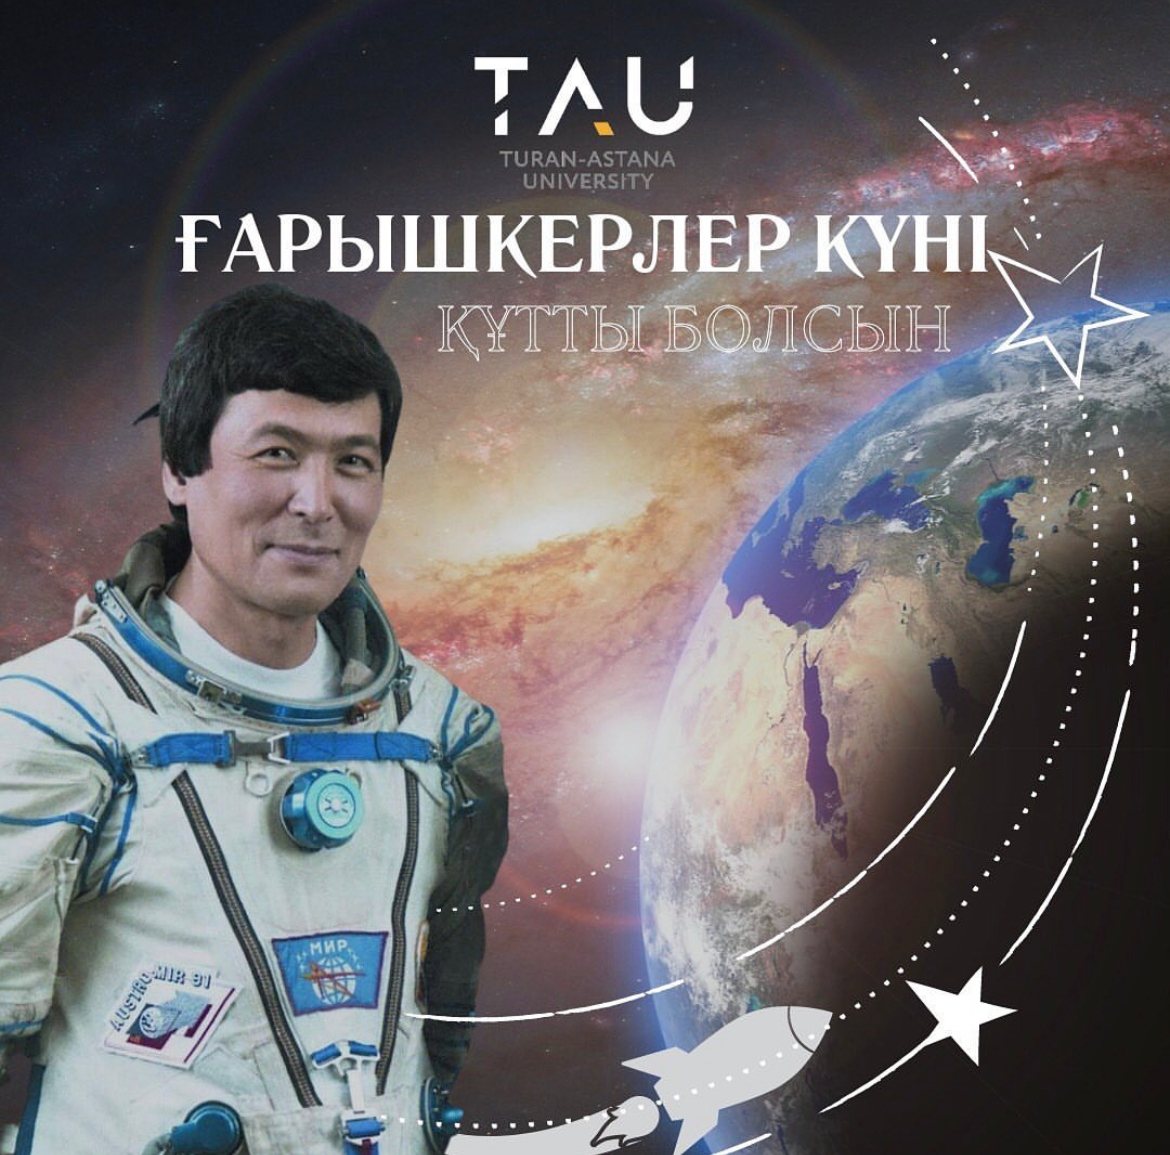 Congratulations on the International Day of Aviation and Cosmonauts!